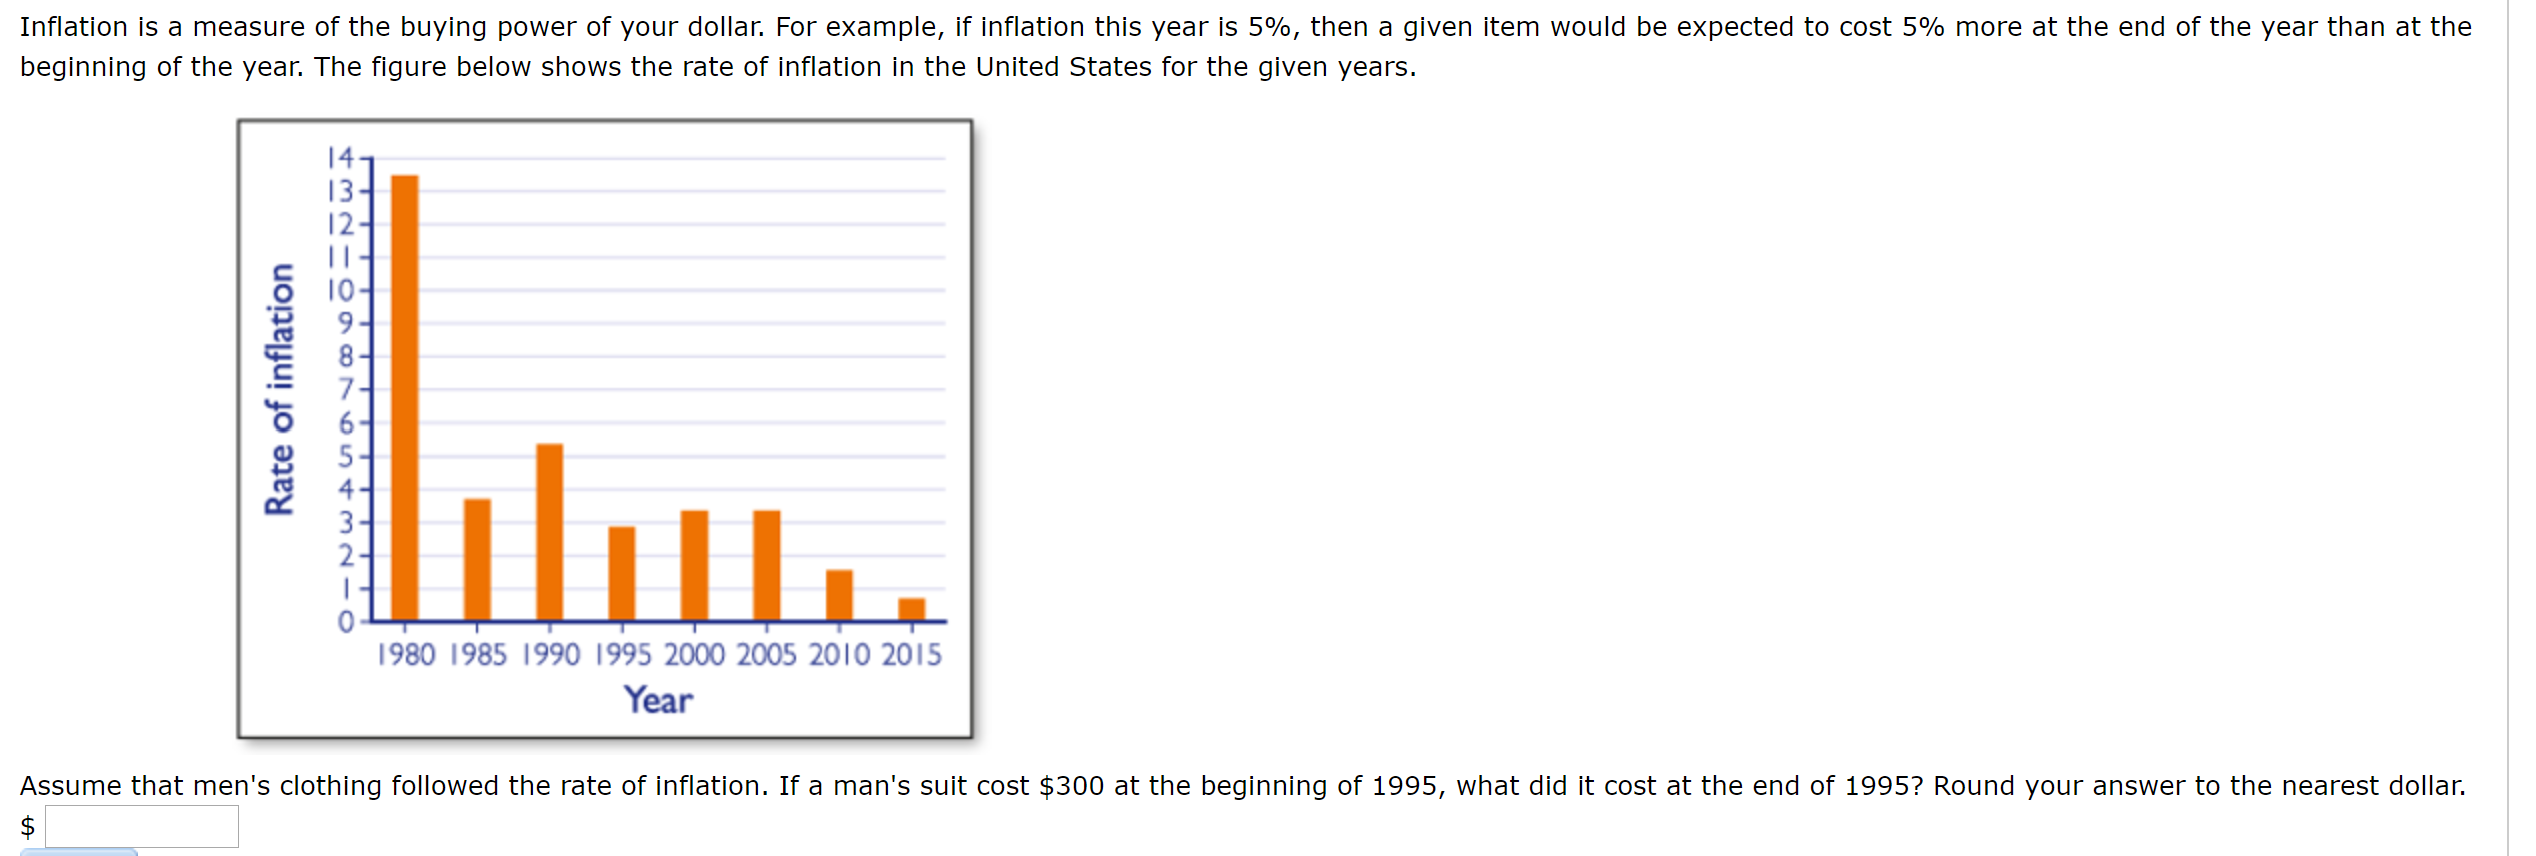 Inflation is a measure of the buying power of your dollar. For example, if inflation this year is 5%, then a given item would be expected to cost 5% more at the end of the year than at the
beginning of the year. The figure below shows the rate of inflation in the United States for the given years.
14
13-
7.
3-
2-
П
1980 1985 1990 1995 2000 2005 2010 2015
Year
Assume that men's clothing followed the rate of inflation. If a man's suit cost $300 at the beginning of 1995, what did it cost at the end of 1995? Round your answer to the nearest dollar.
Rate of inflation
